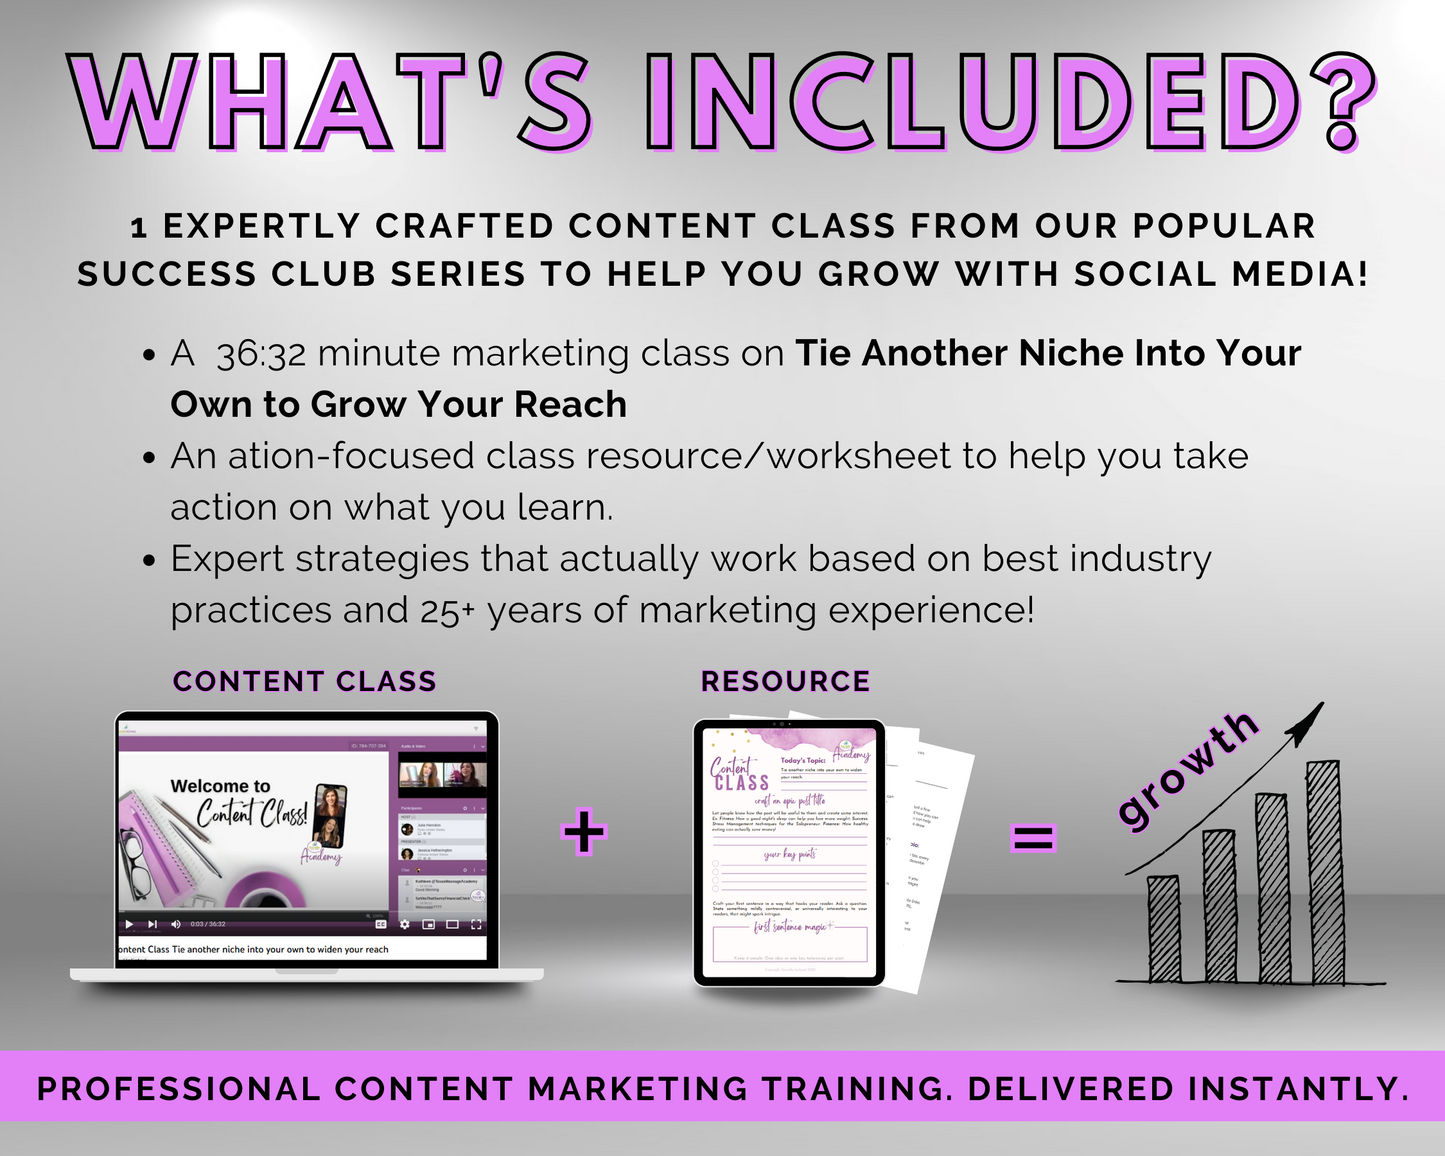 Content Class - Tie Another Niche Into Your Own to Grow Your Reach Masterclass